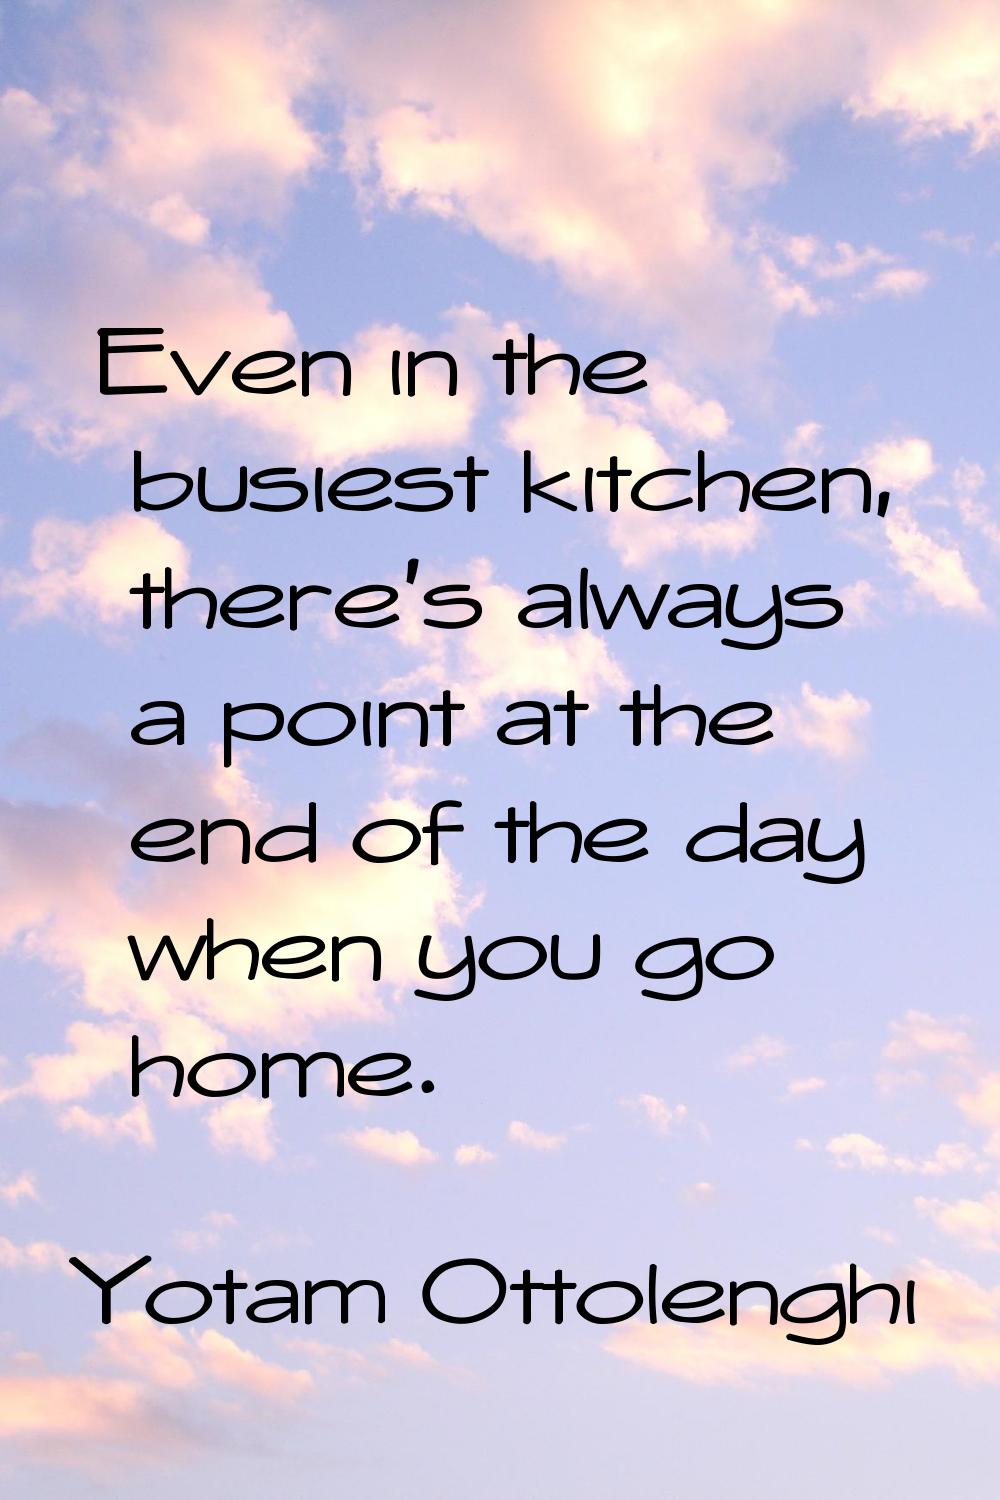 Even in the busiest kitchen, there's always a point at the end of the day when you go home.